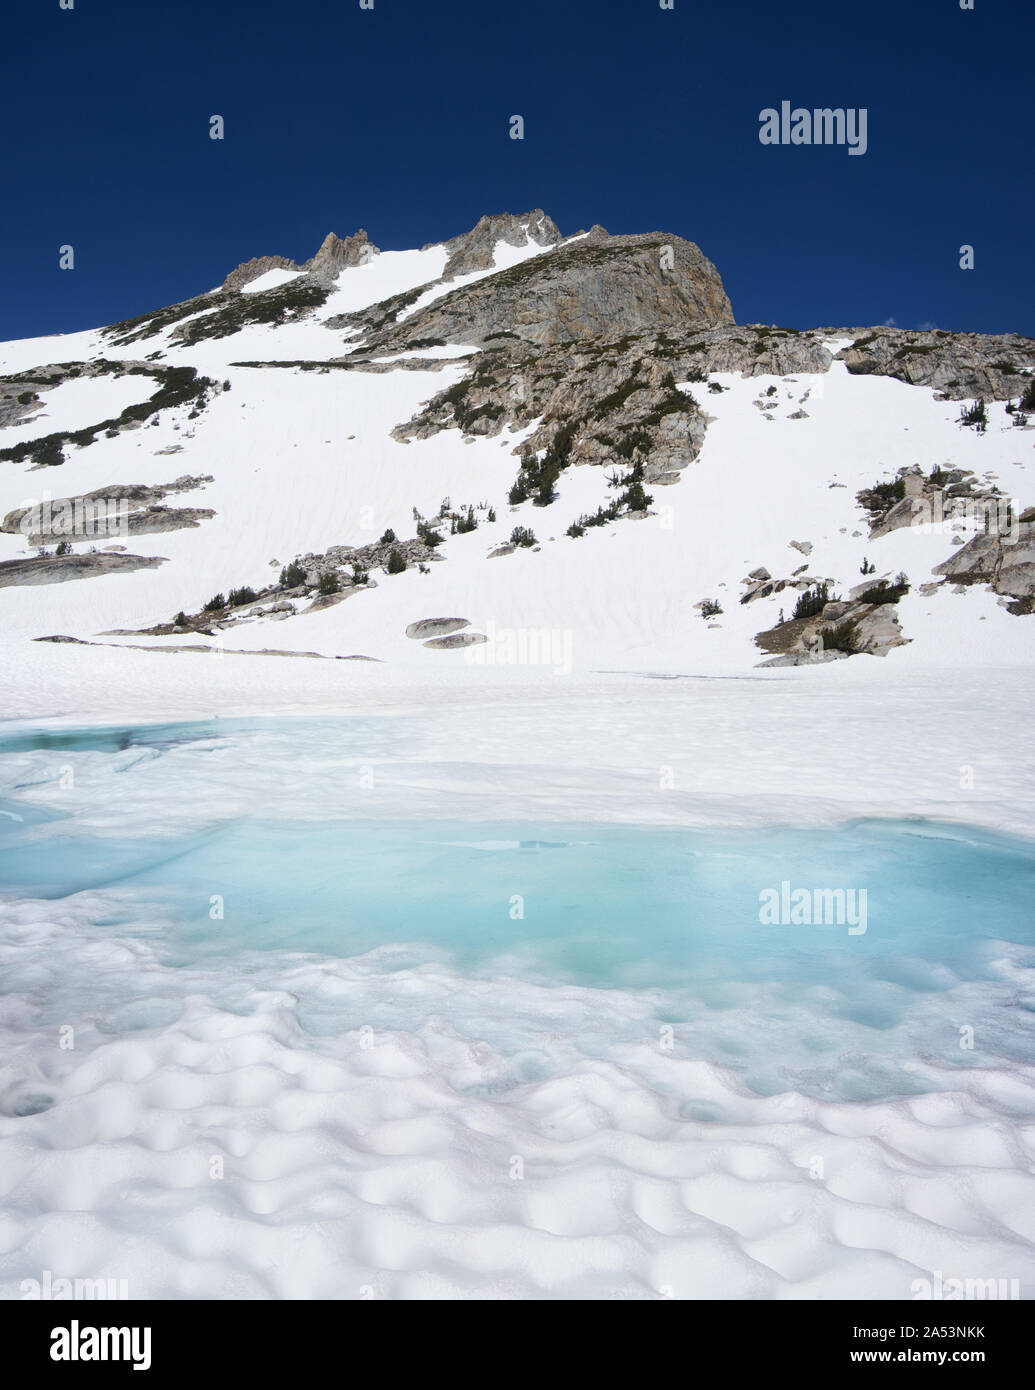 North Peak rises above a snowy but starting to melt lake near Tioga Pass in the Sierra Nevada Mountains Stock Photo